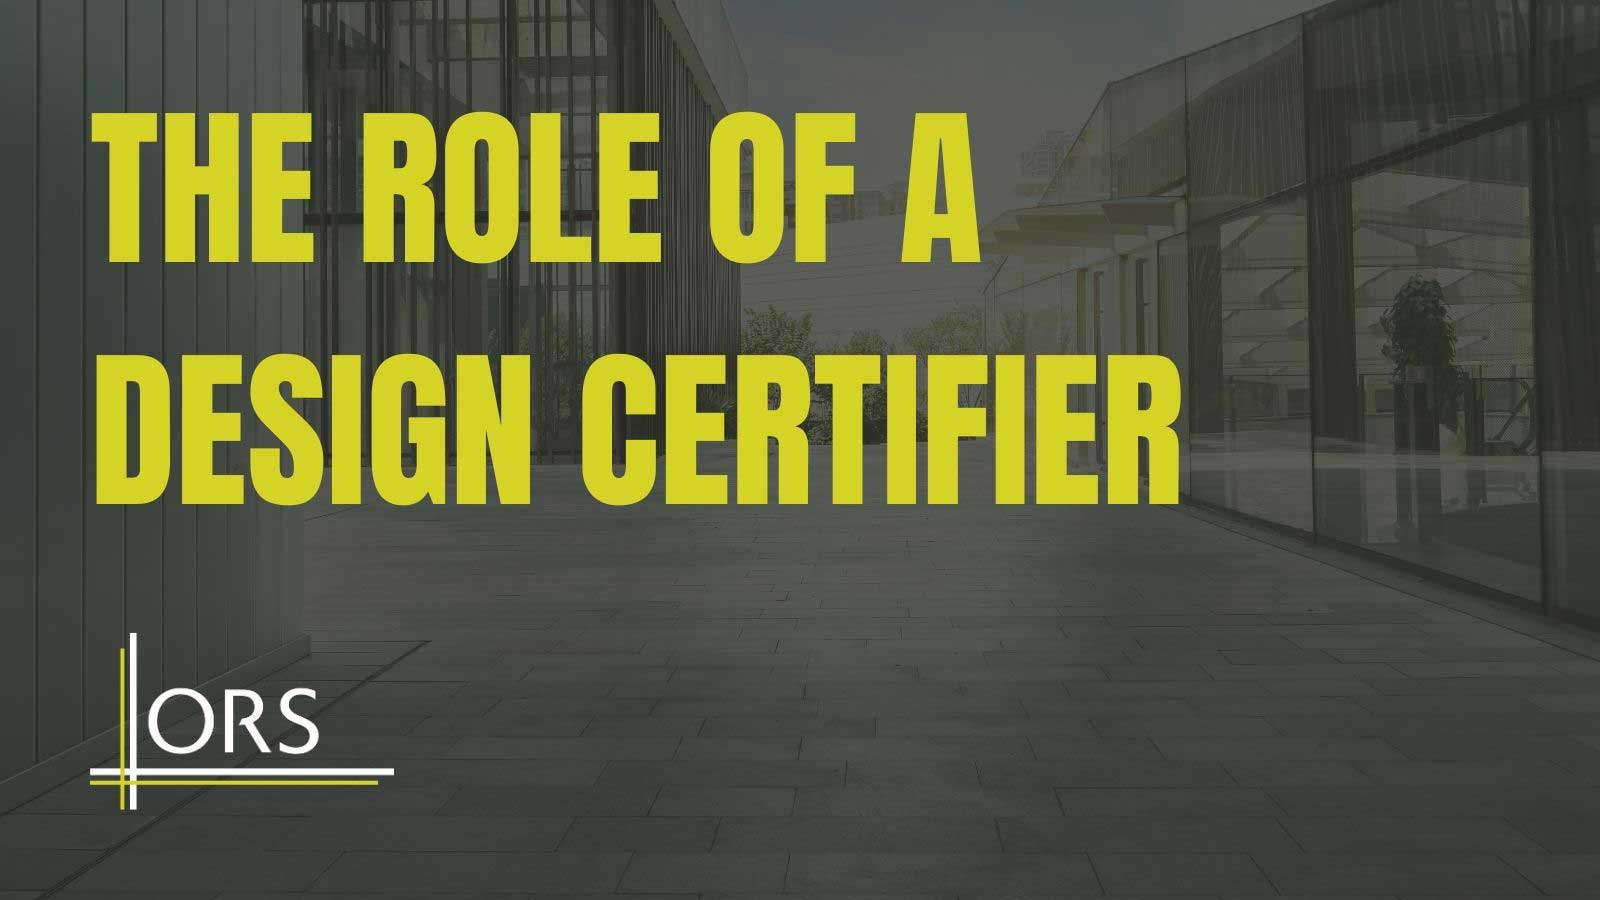 The Role of a Design Certifier